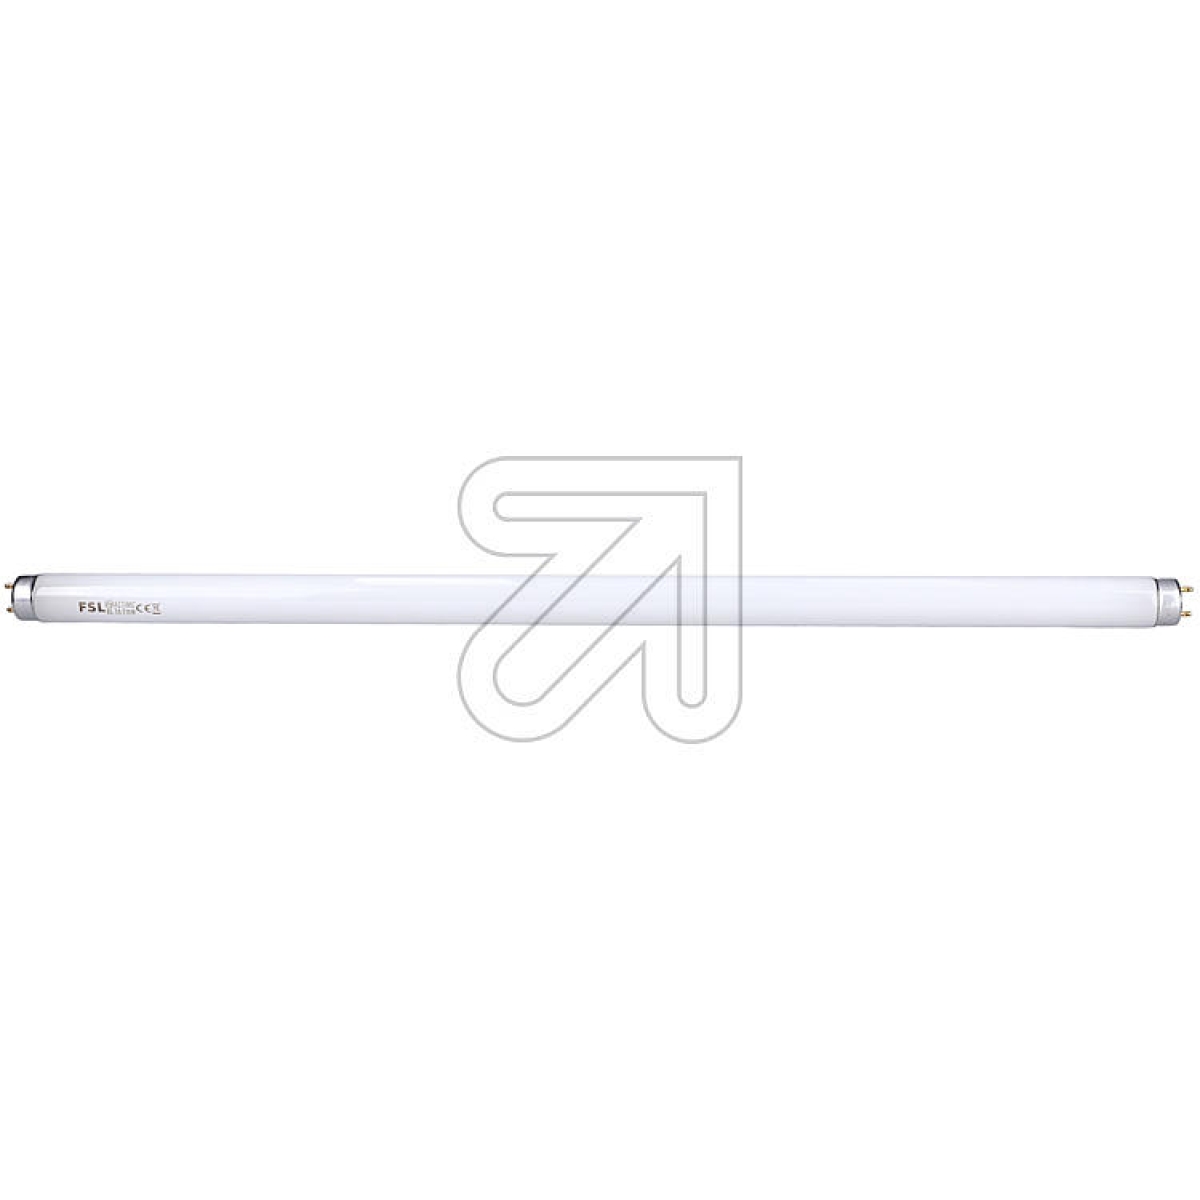 VELAMPReplacement tube for 401330 TBMK 340 VelampArticle-No: 401360